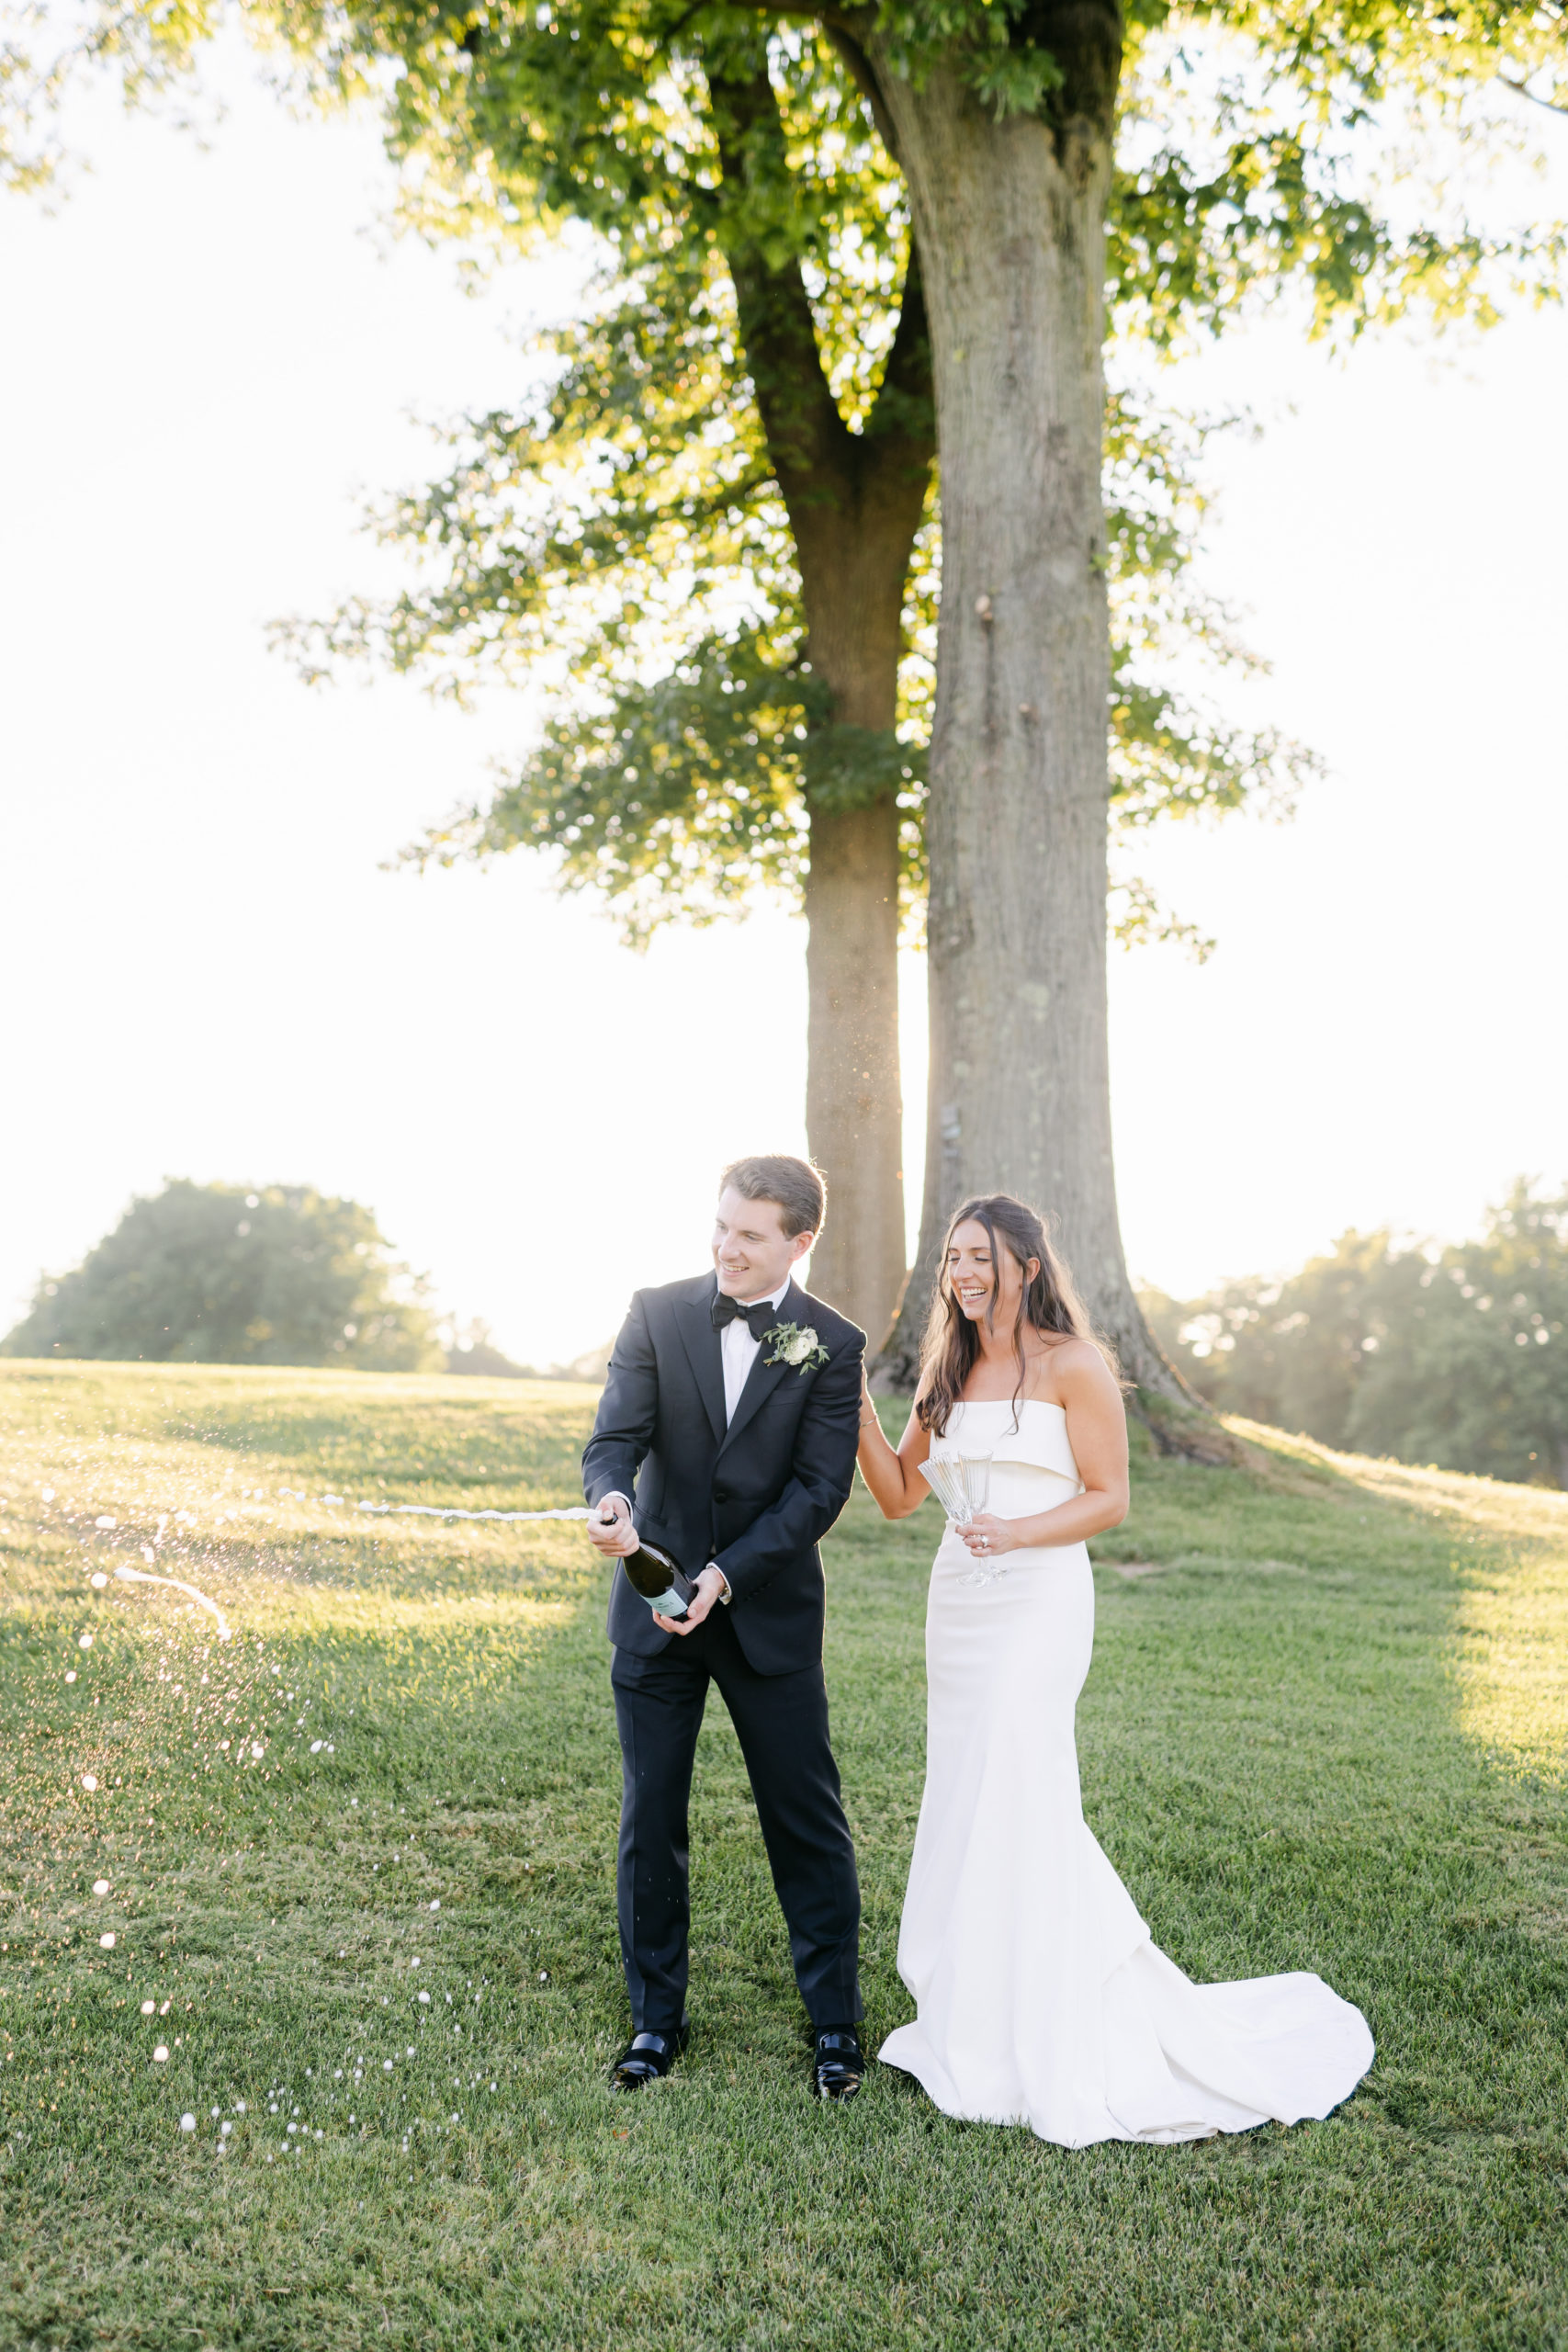 Sunset Portraits at Oak Hill Country Club Wedding - Best Venues in Rochester NY - Verve Event Co.